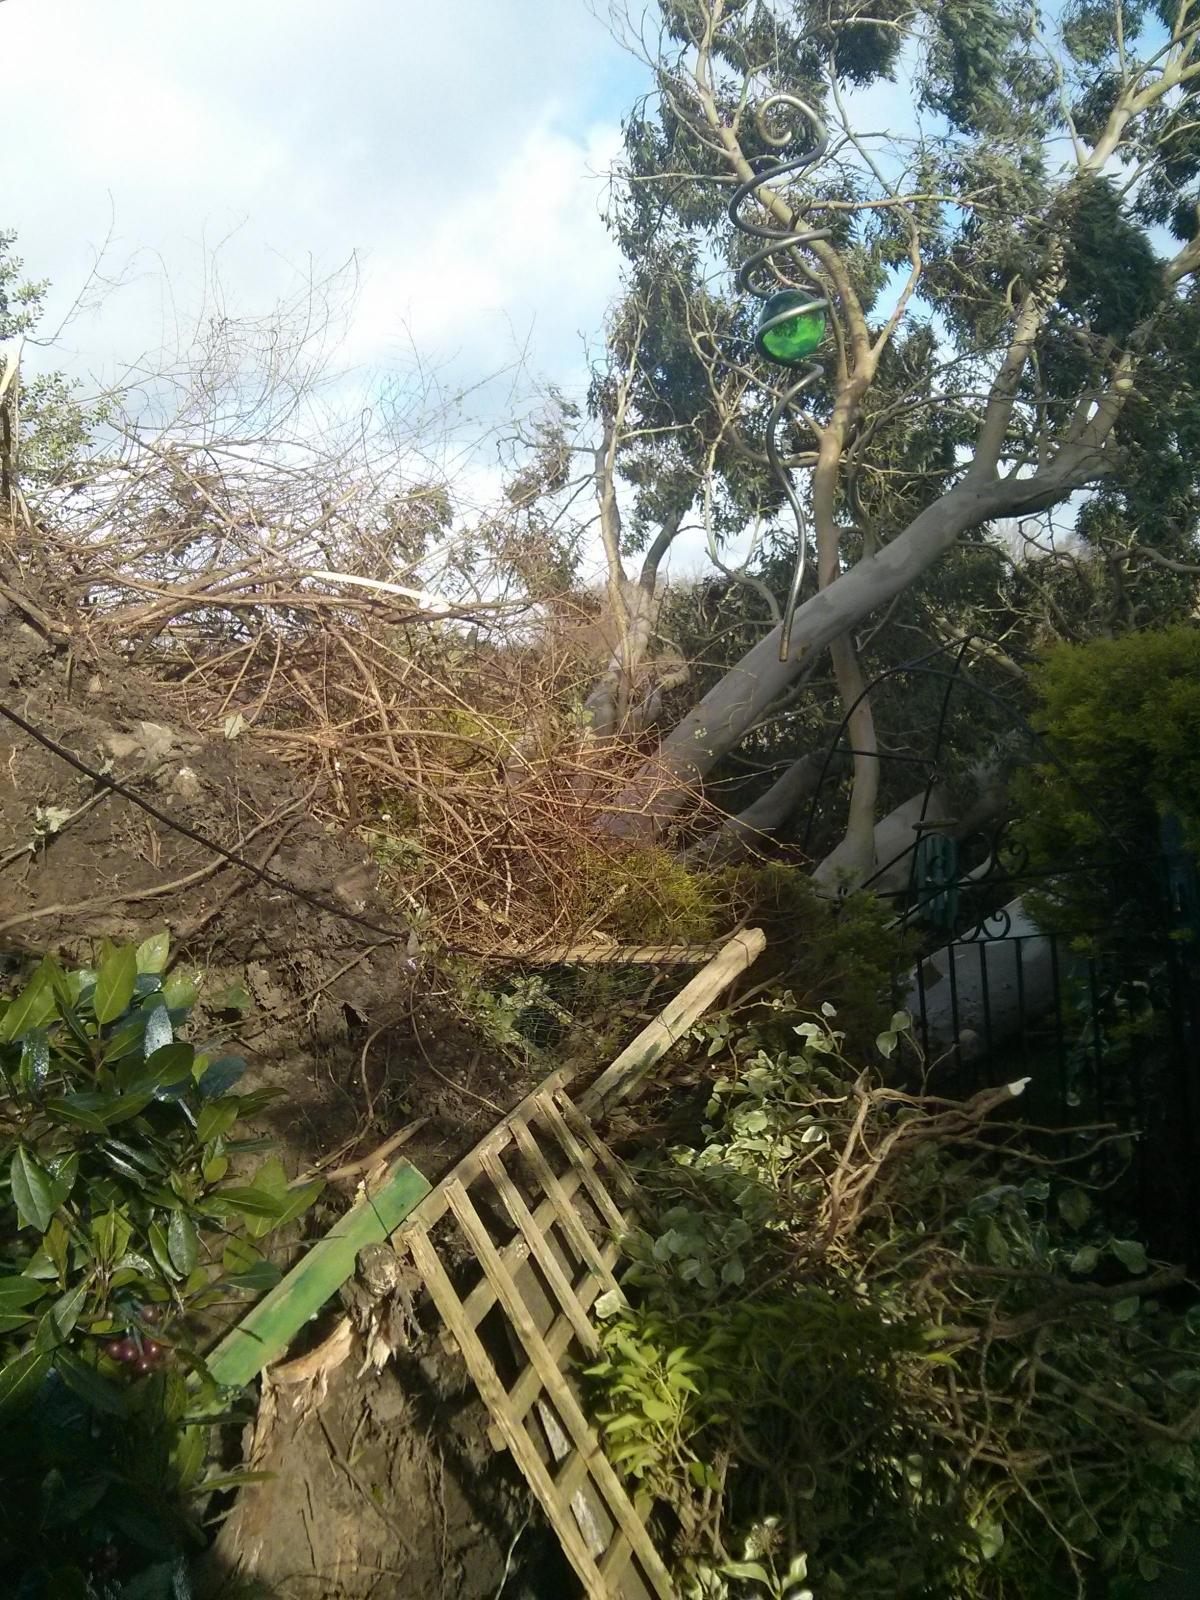 Daily Echo reader photos of the storm and damage left behind after severe weather swept through Dorset on February 14 and February 15. 40ft tree falls in elderly couple's garden in Wimborne. Picture by Katie Libby.